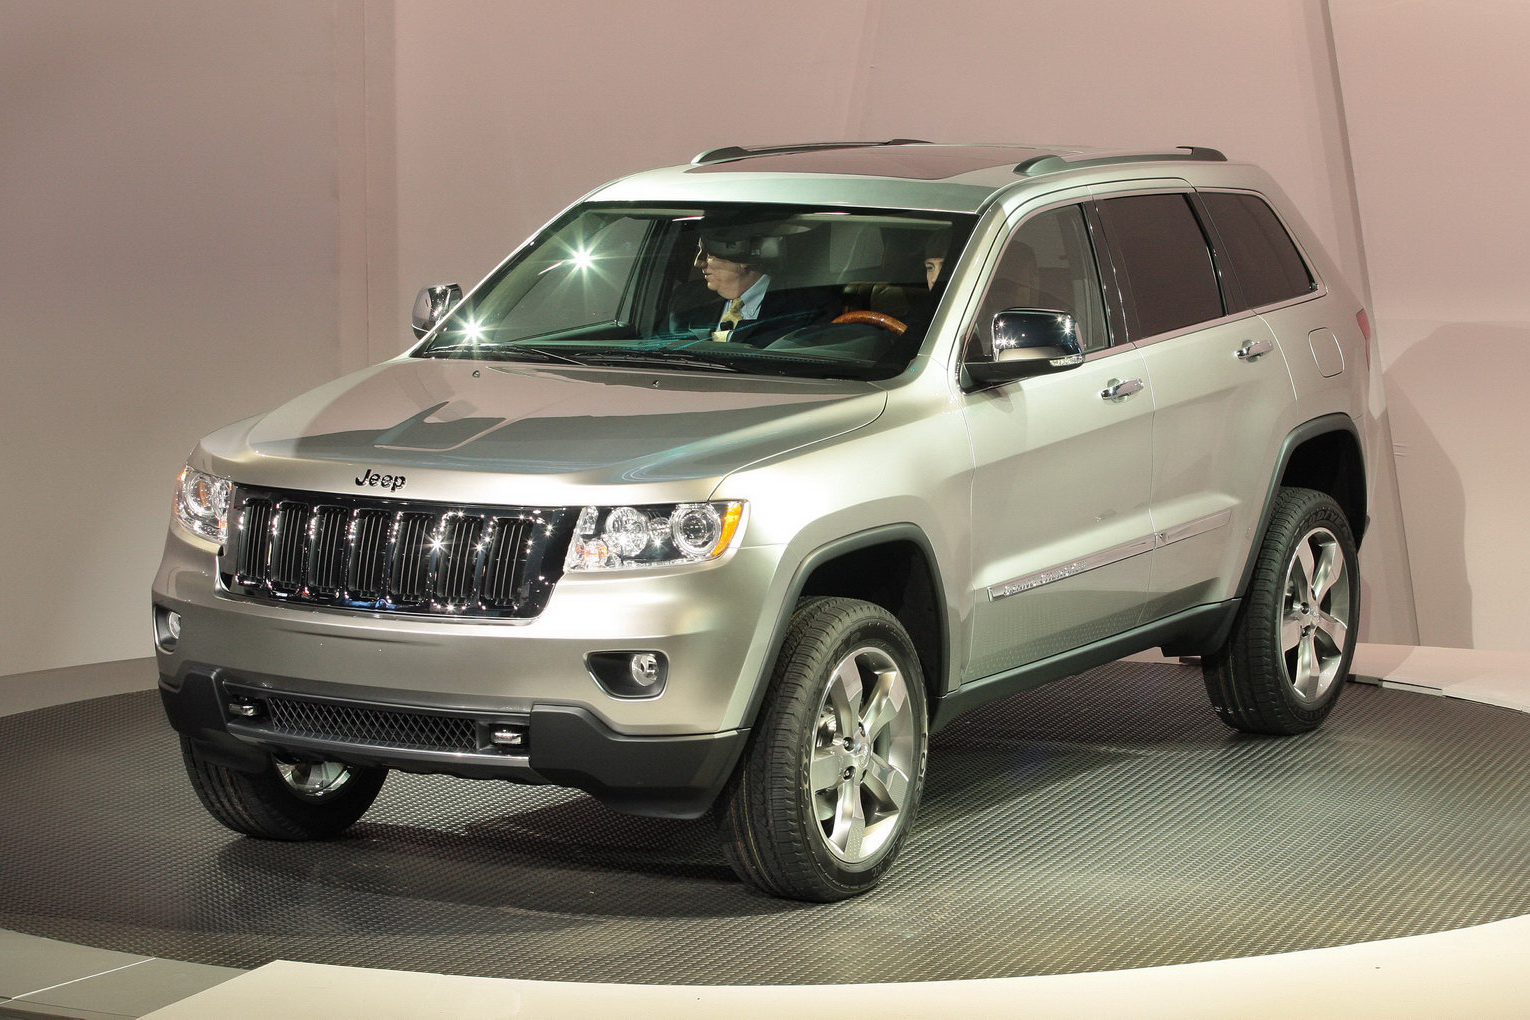 2011 Jeep Grand Cherokee Prices Announced, Starts from